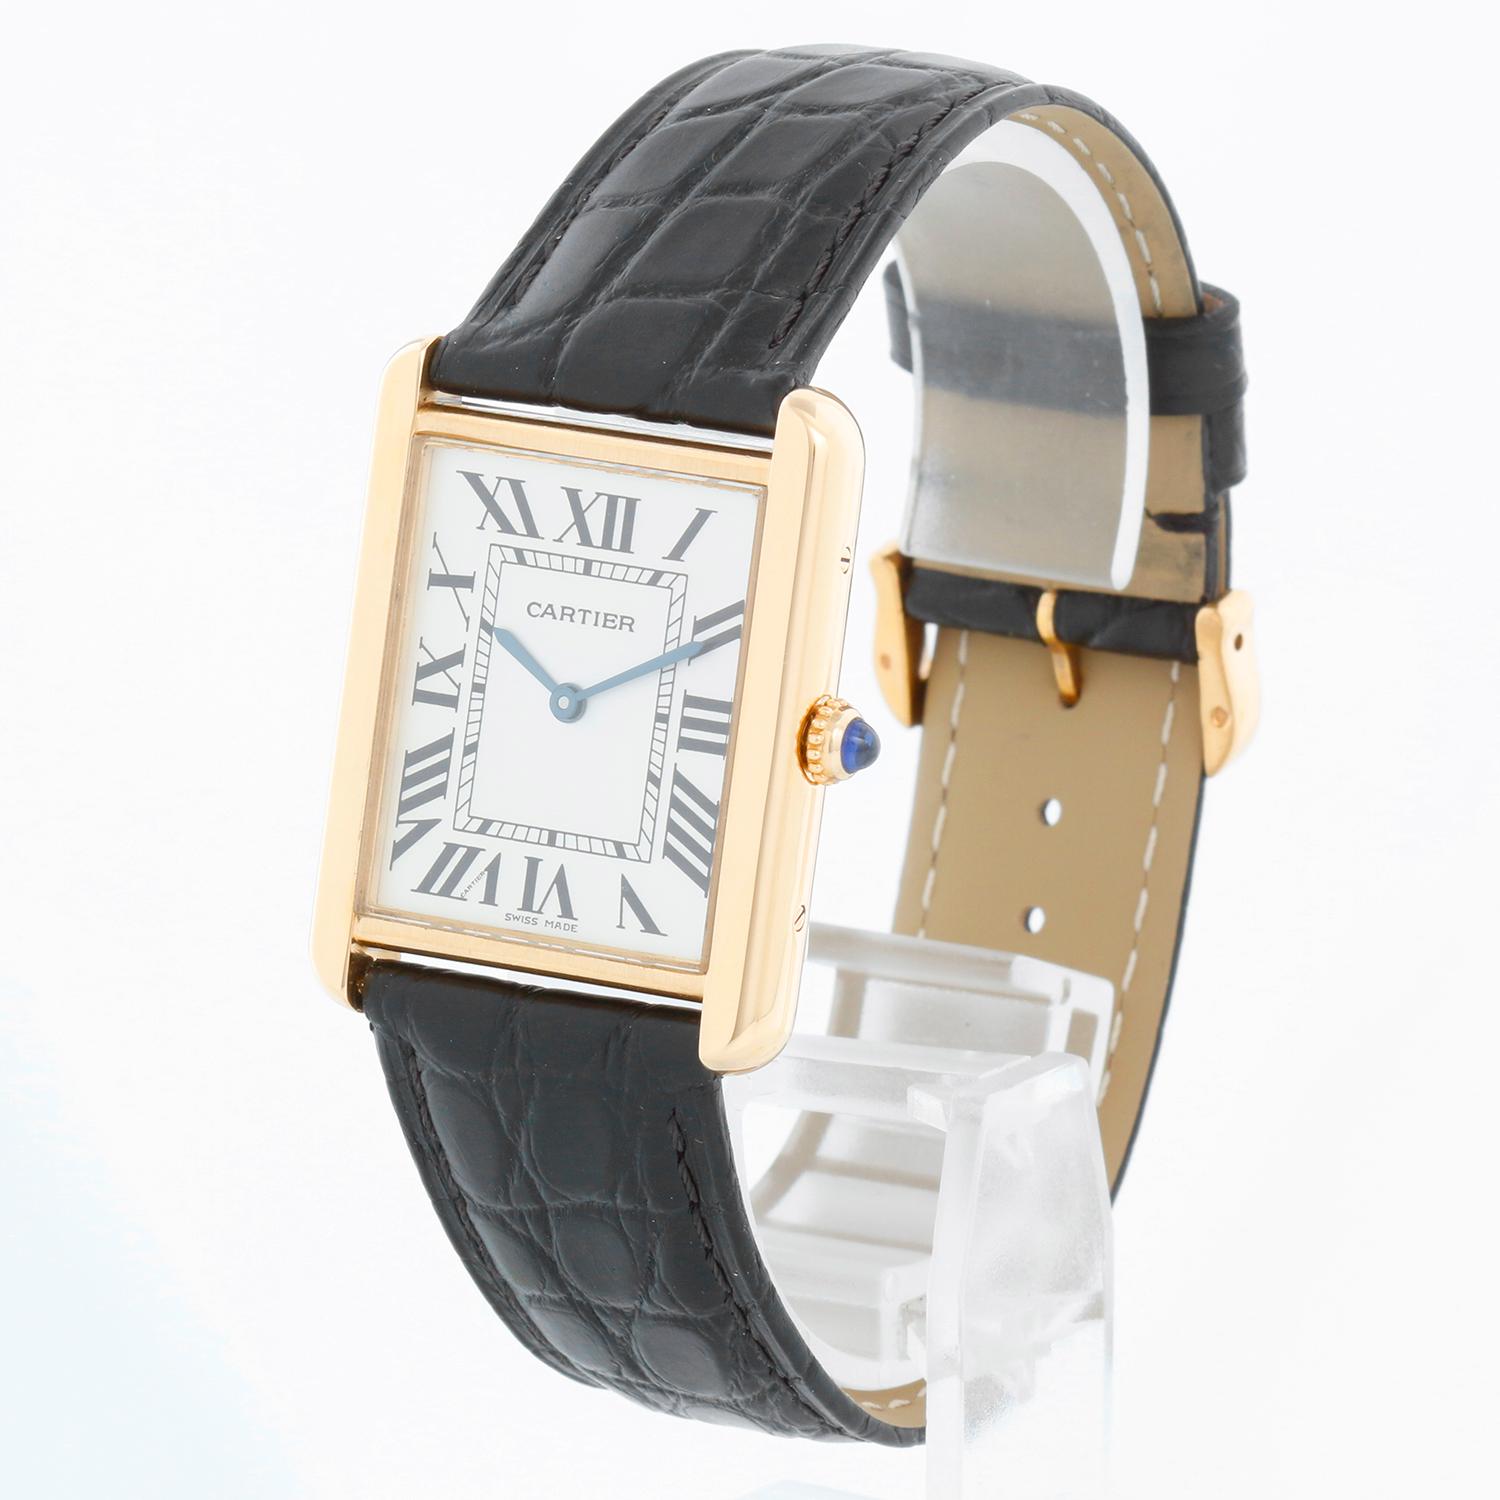 Cartier Tank Solo 18K Yellow Gold Men's Watch W1018855 2742 - Quartz movement. 18k yellow gold case with stainless steel back (27mm x 34mm). Silver colored dial with black Roman numerals. Black Cartier strap band with 18k yellow gold Cartier buckle.